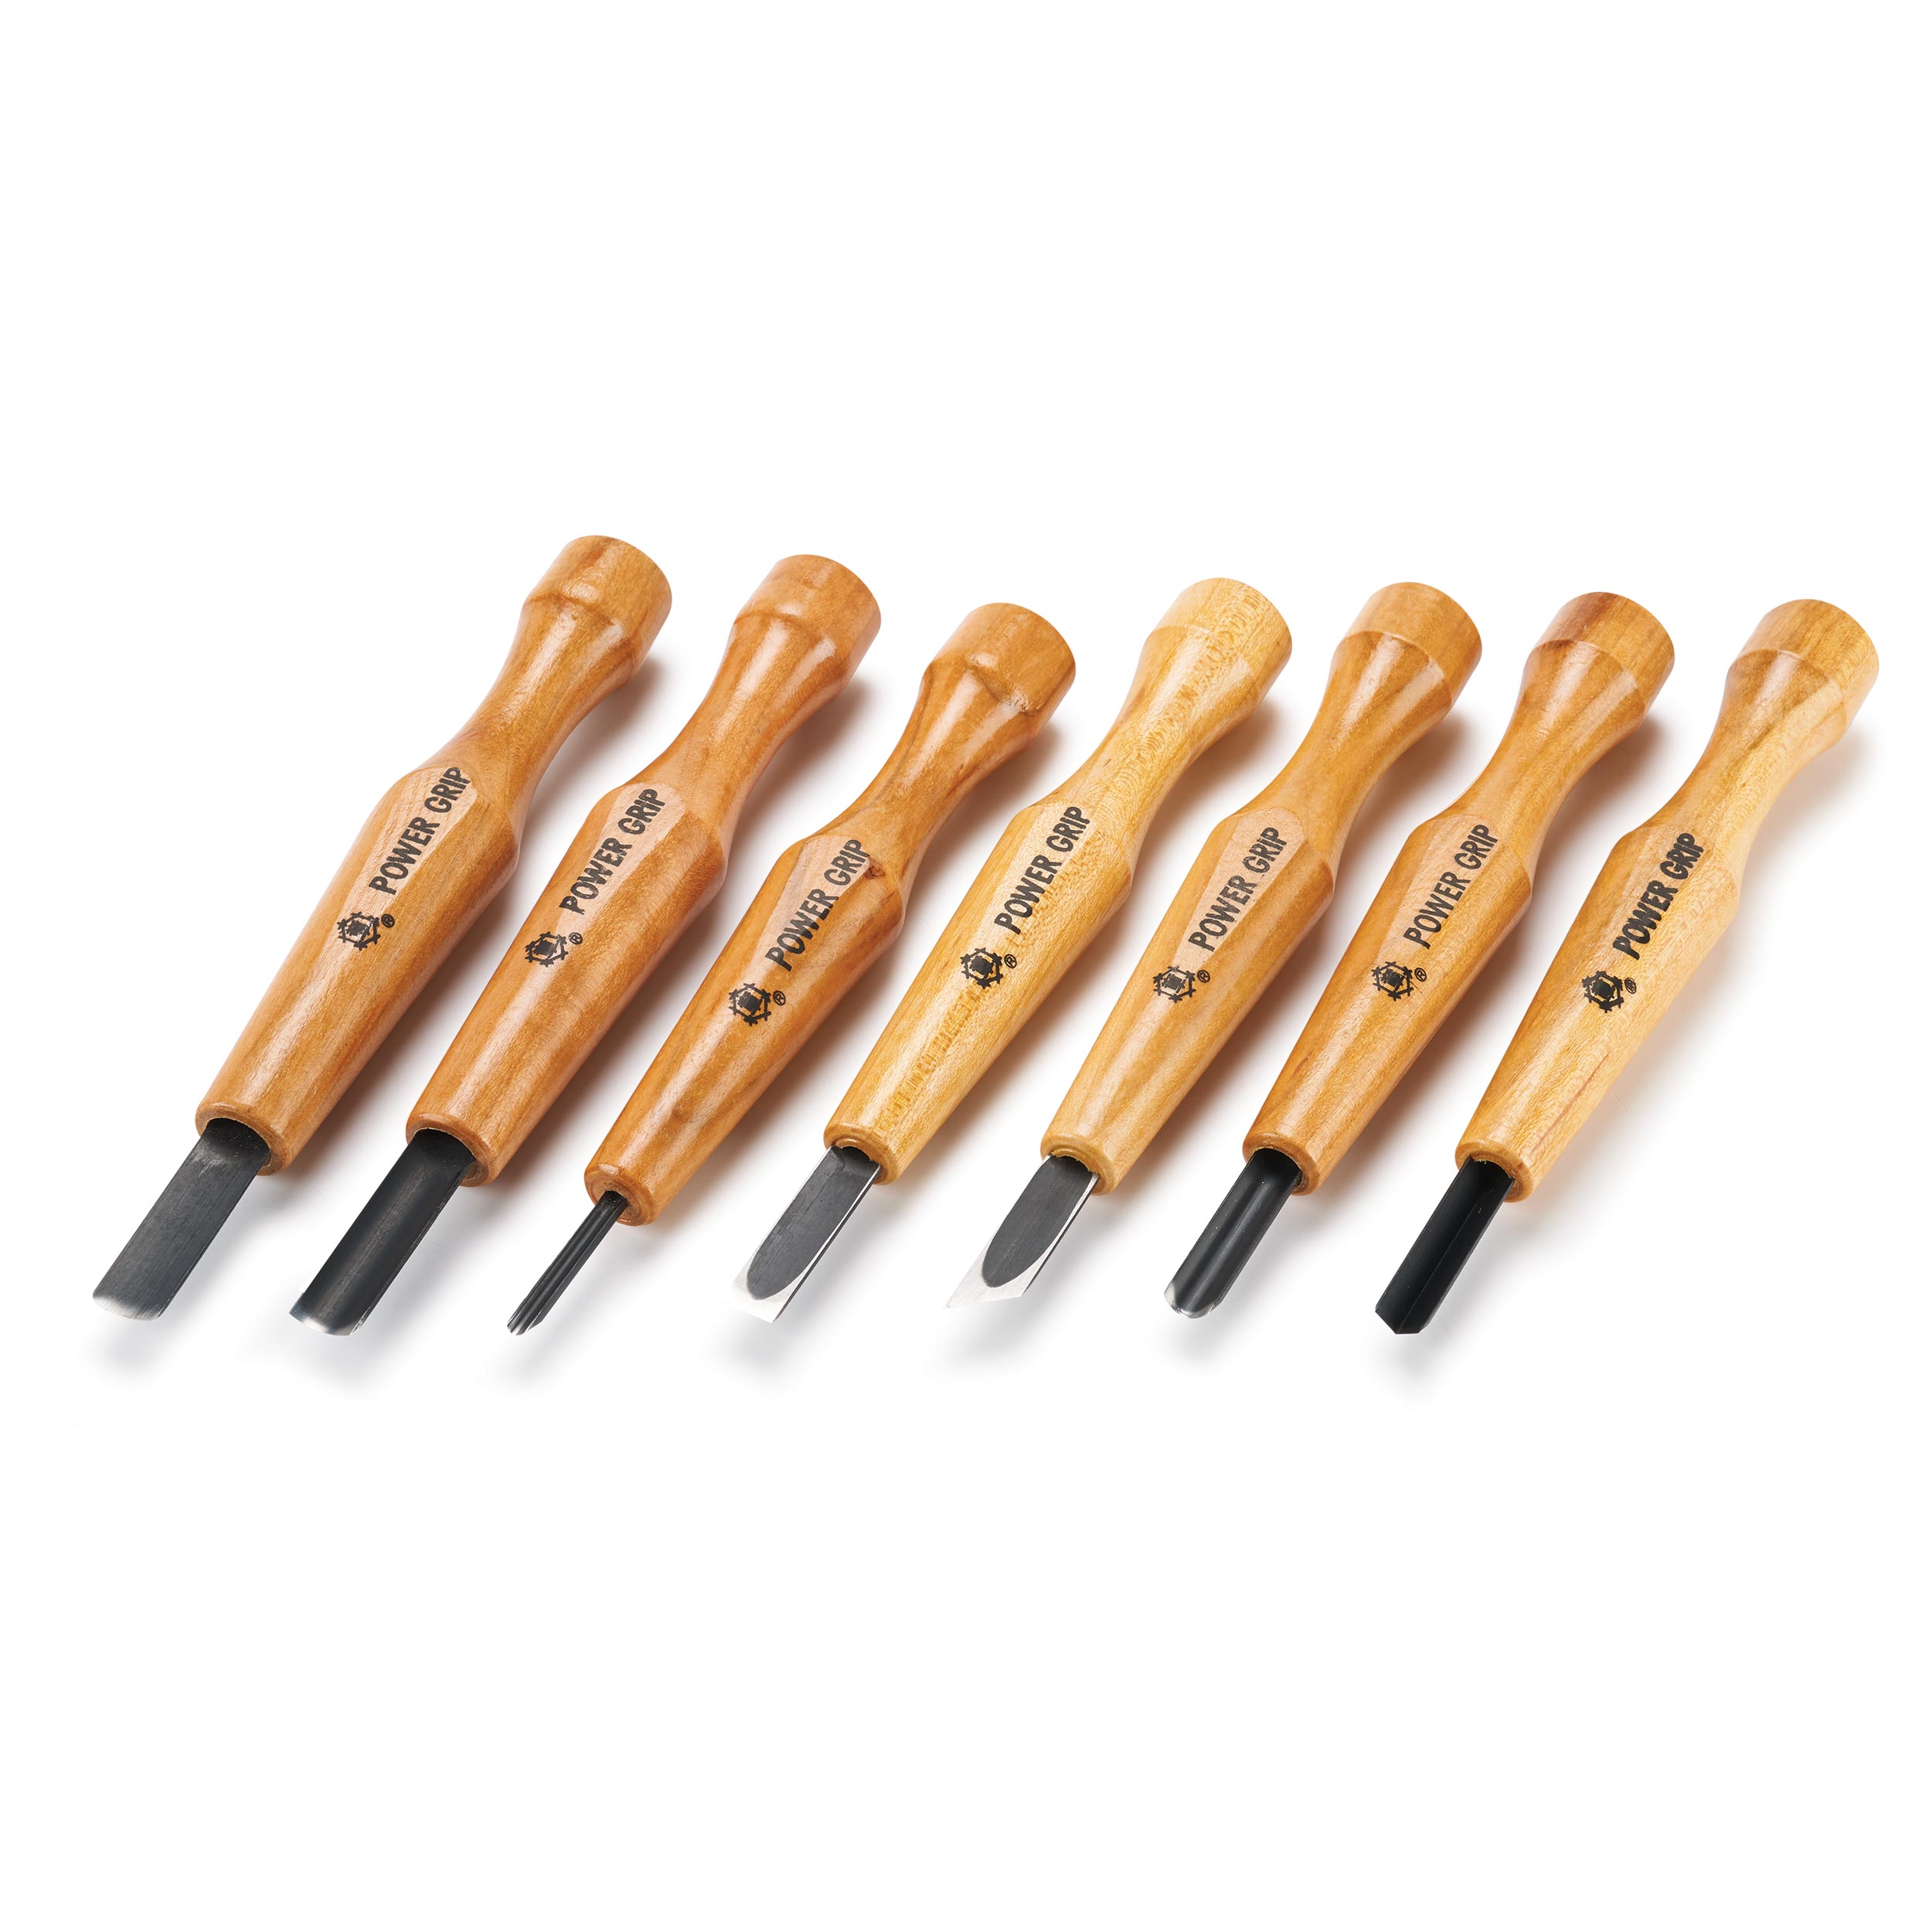 Carving Tool Power Grip Full Size Set 7 piece